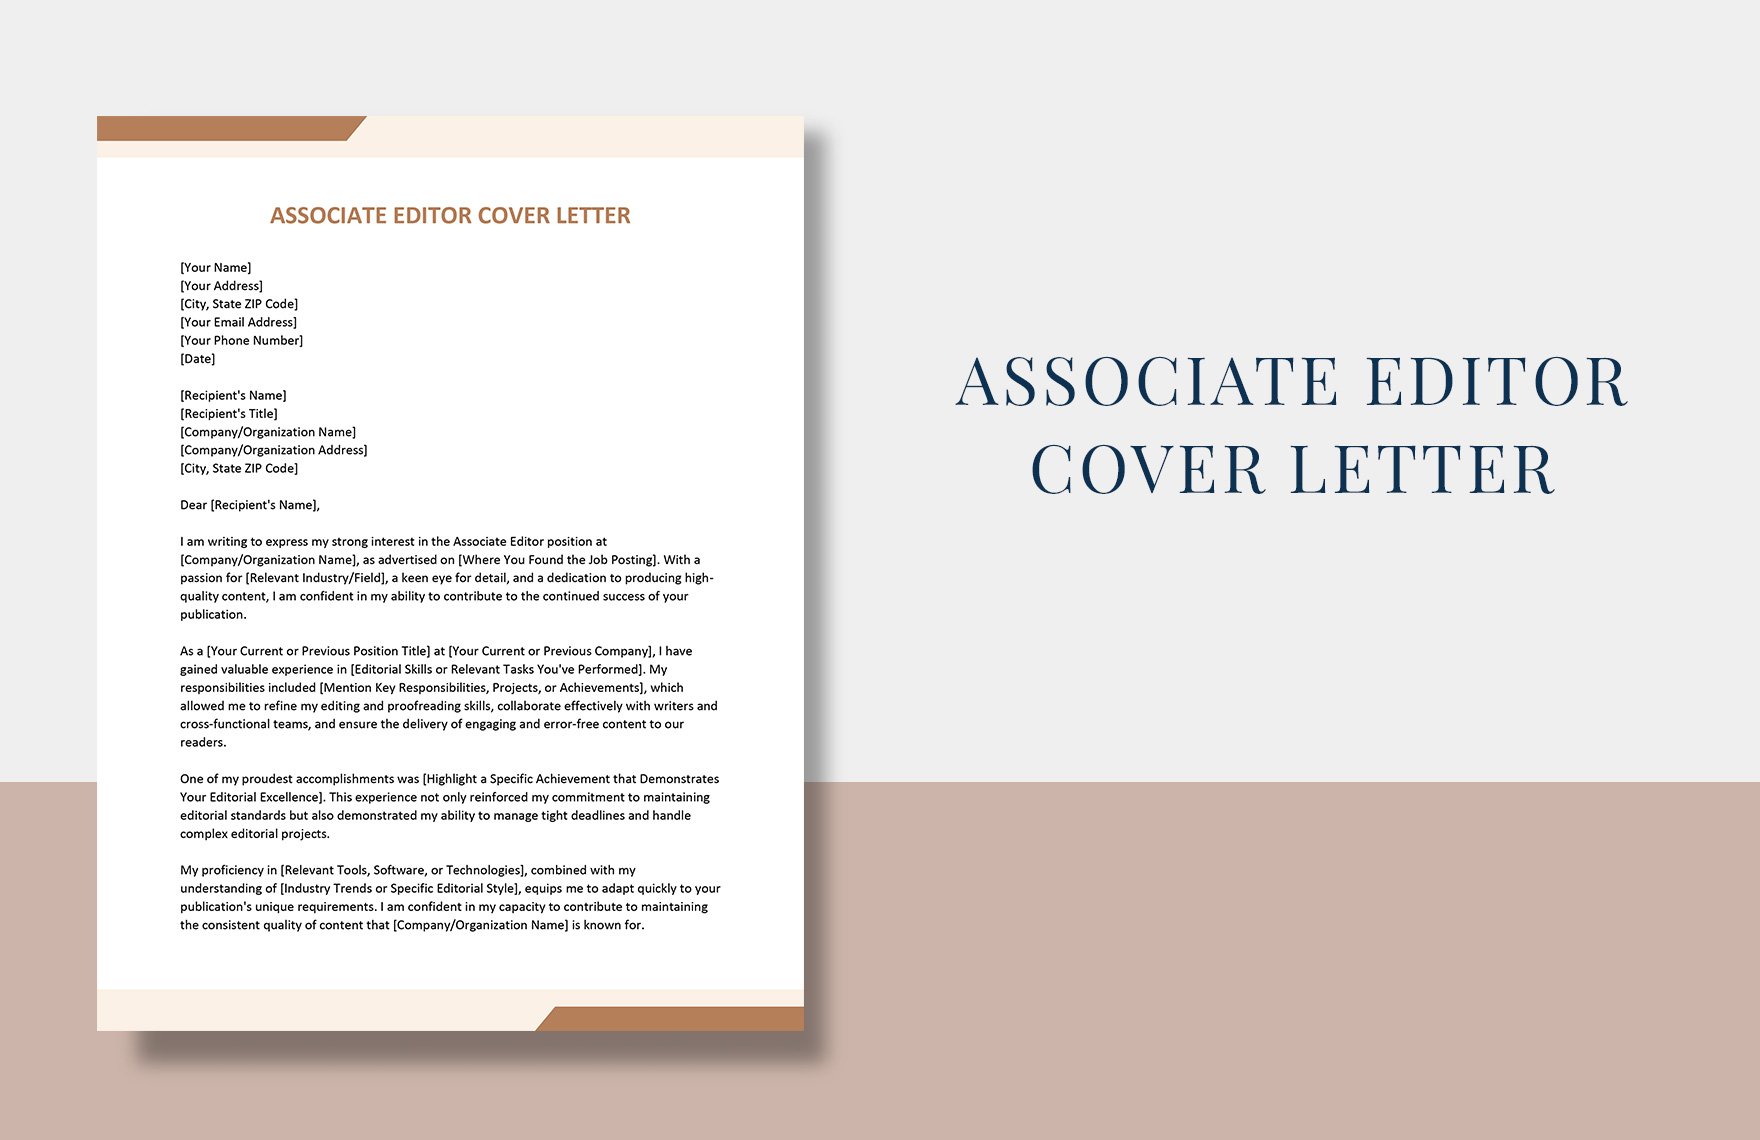 Associate Editor Cover Letter in Word, Google Docs, Apple Pages